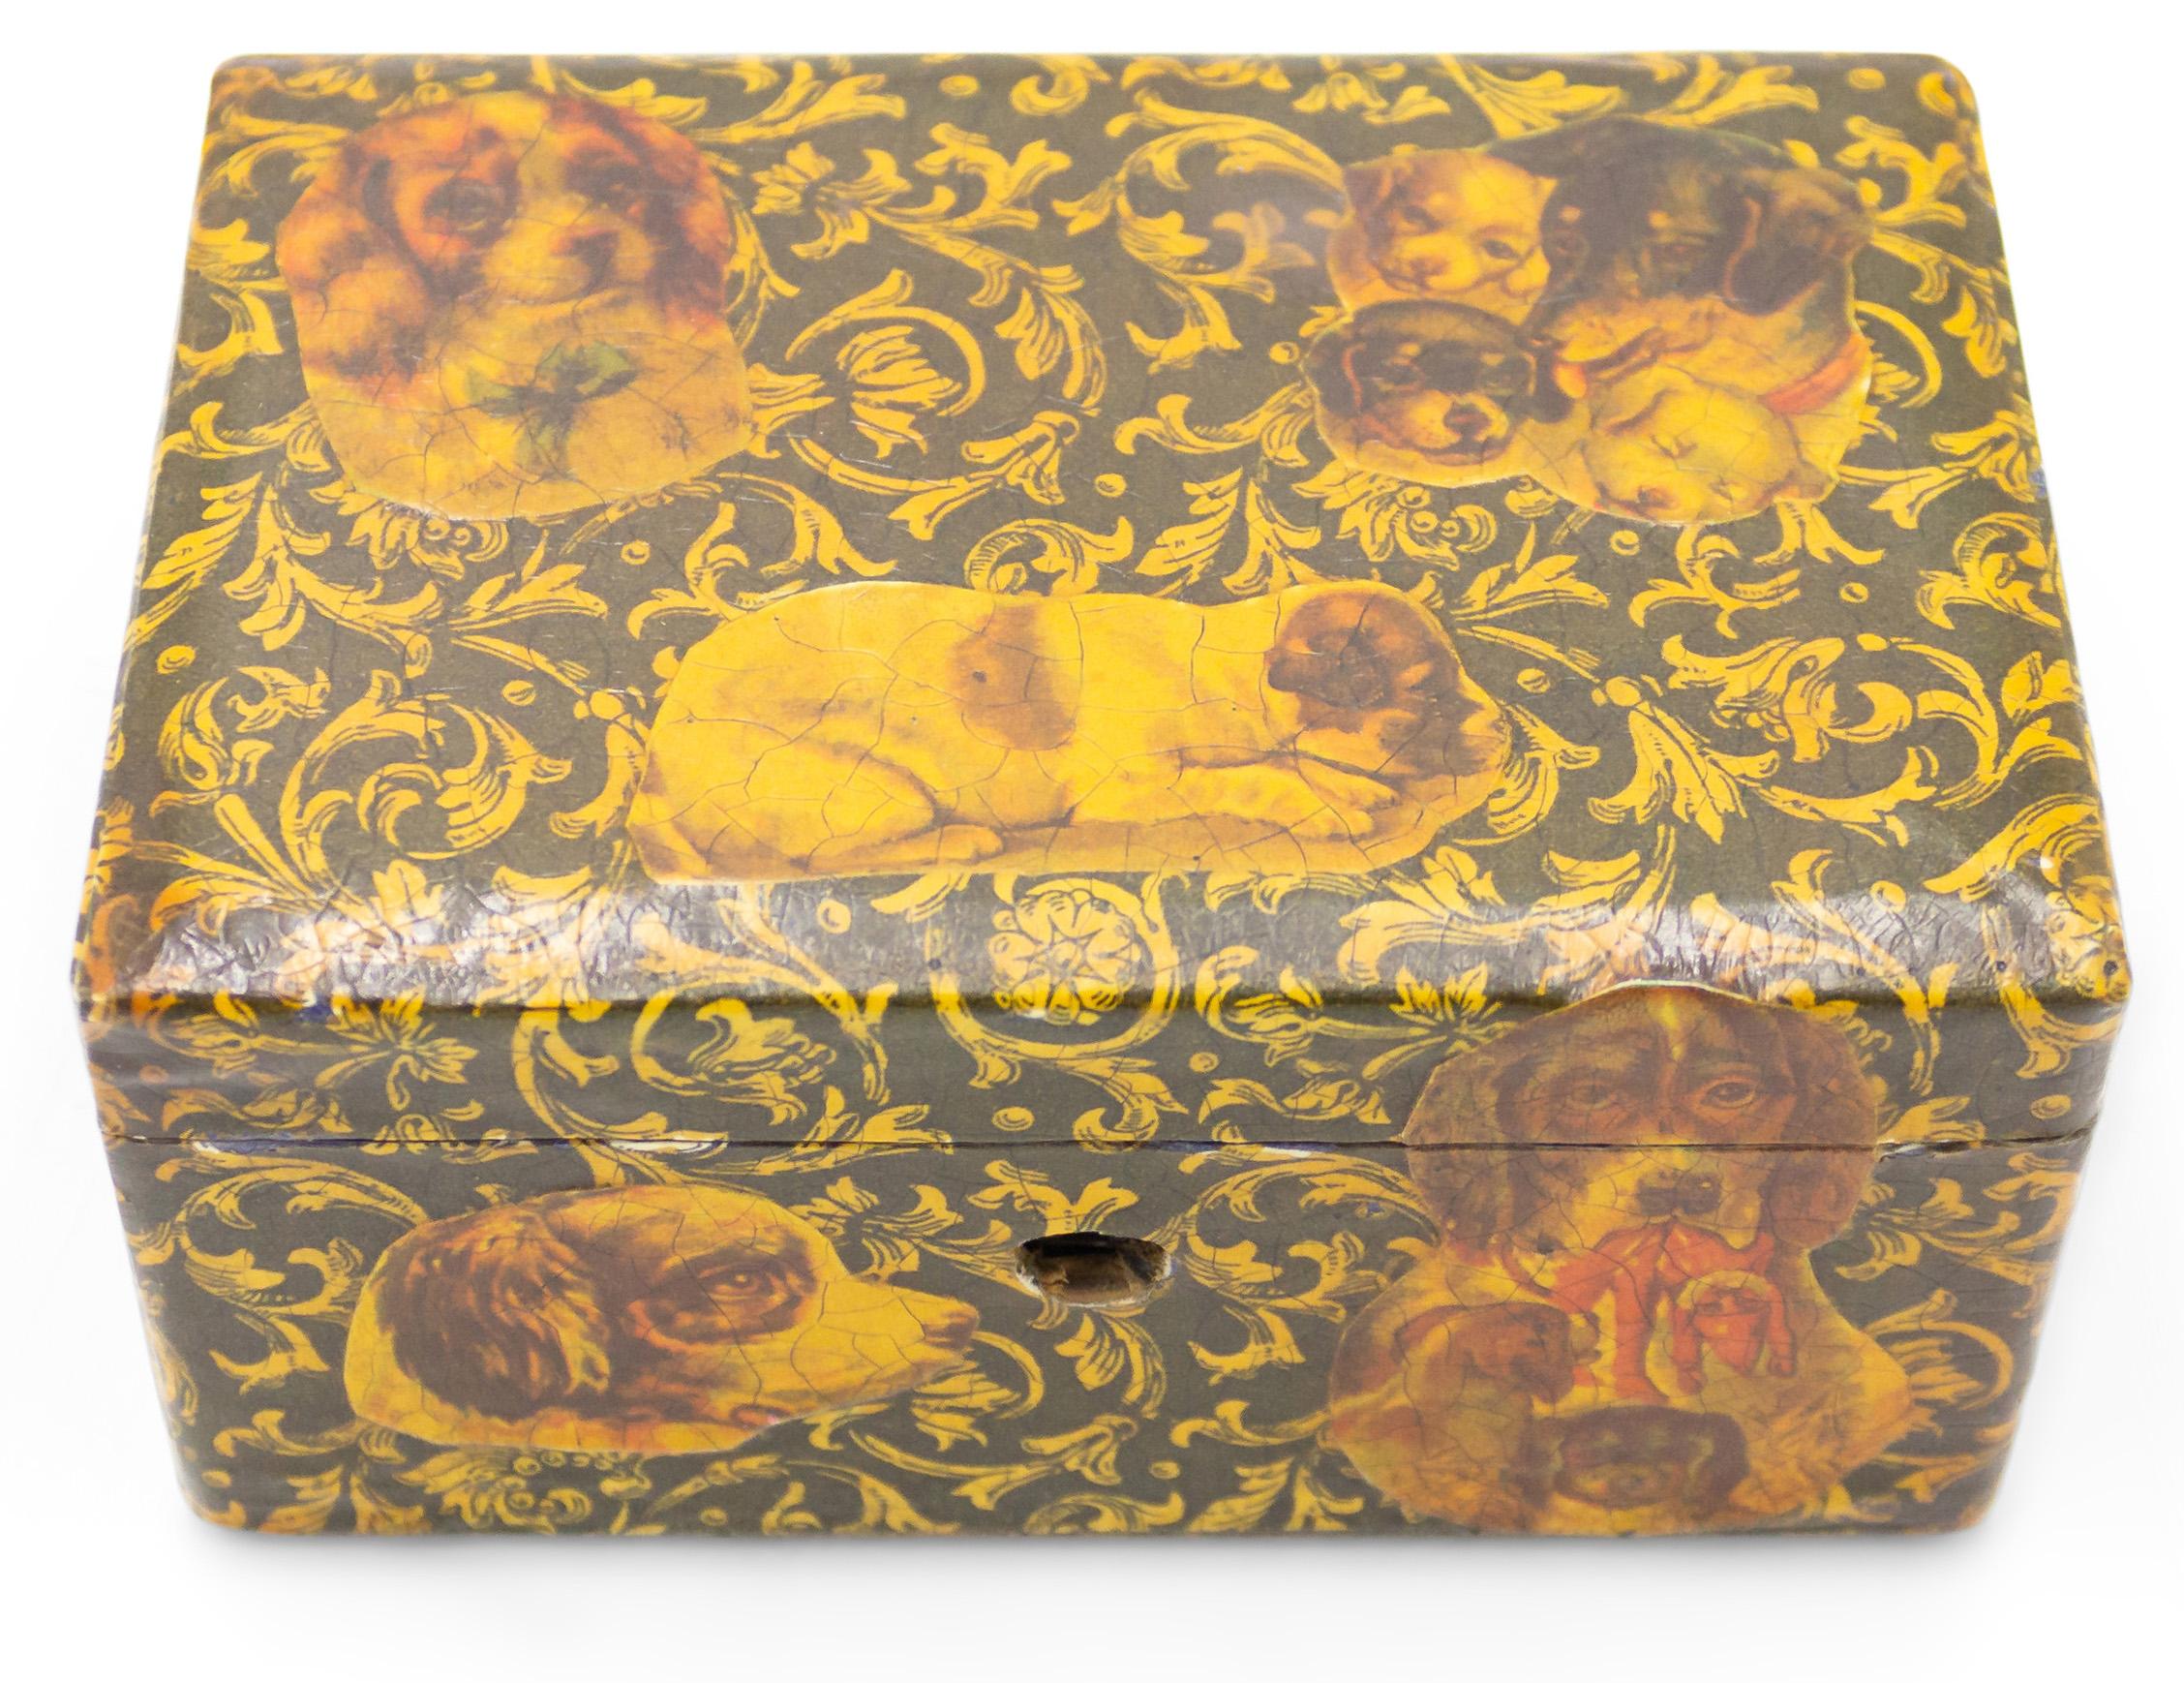 English Victorian-style (20th Century) small decoupage decorated jewelry box with dog head motif.
 